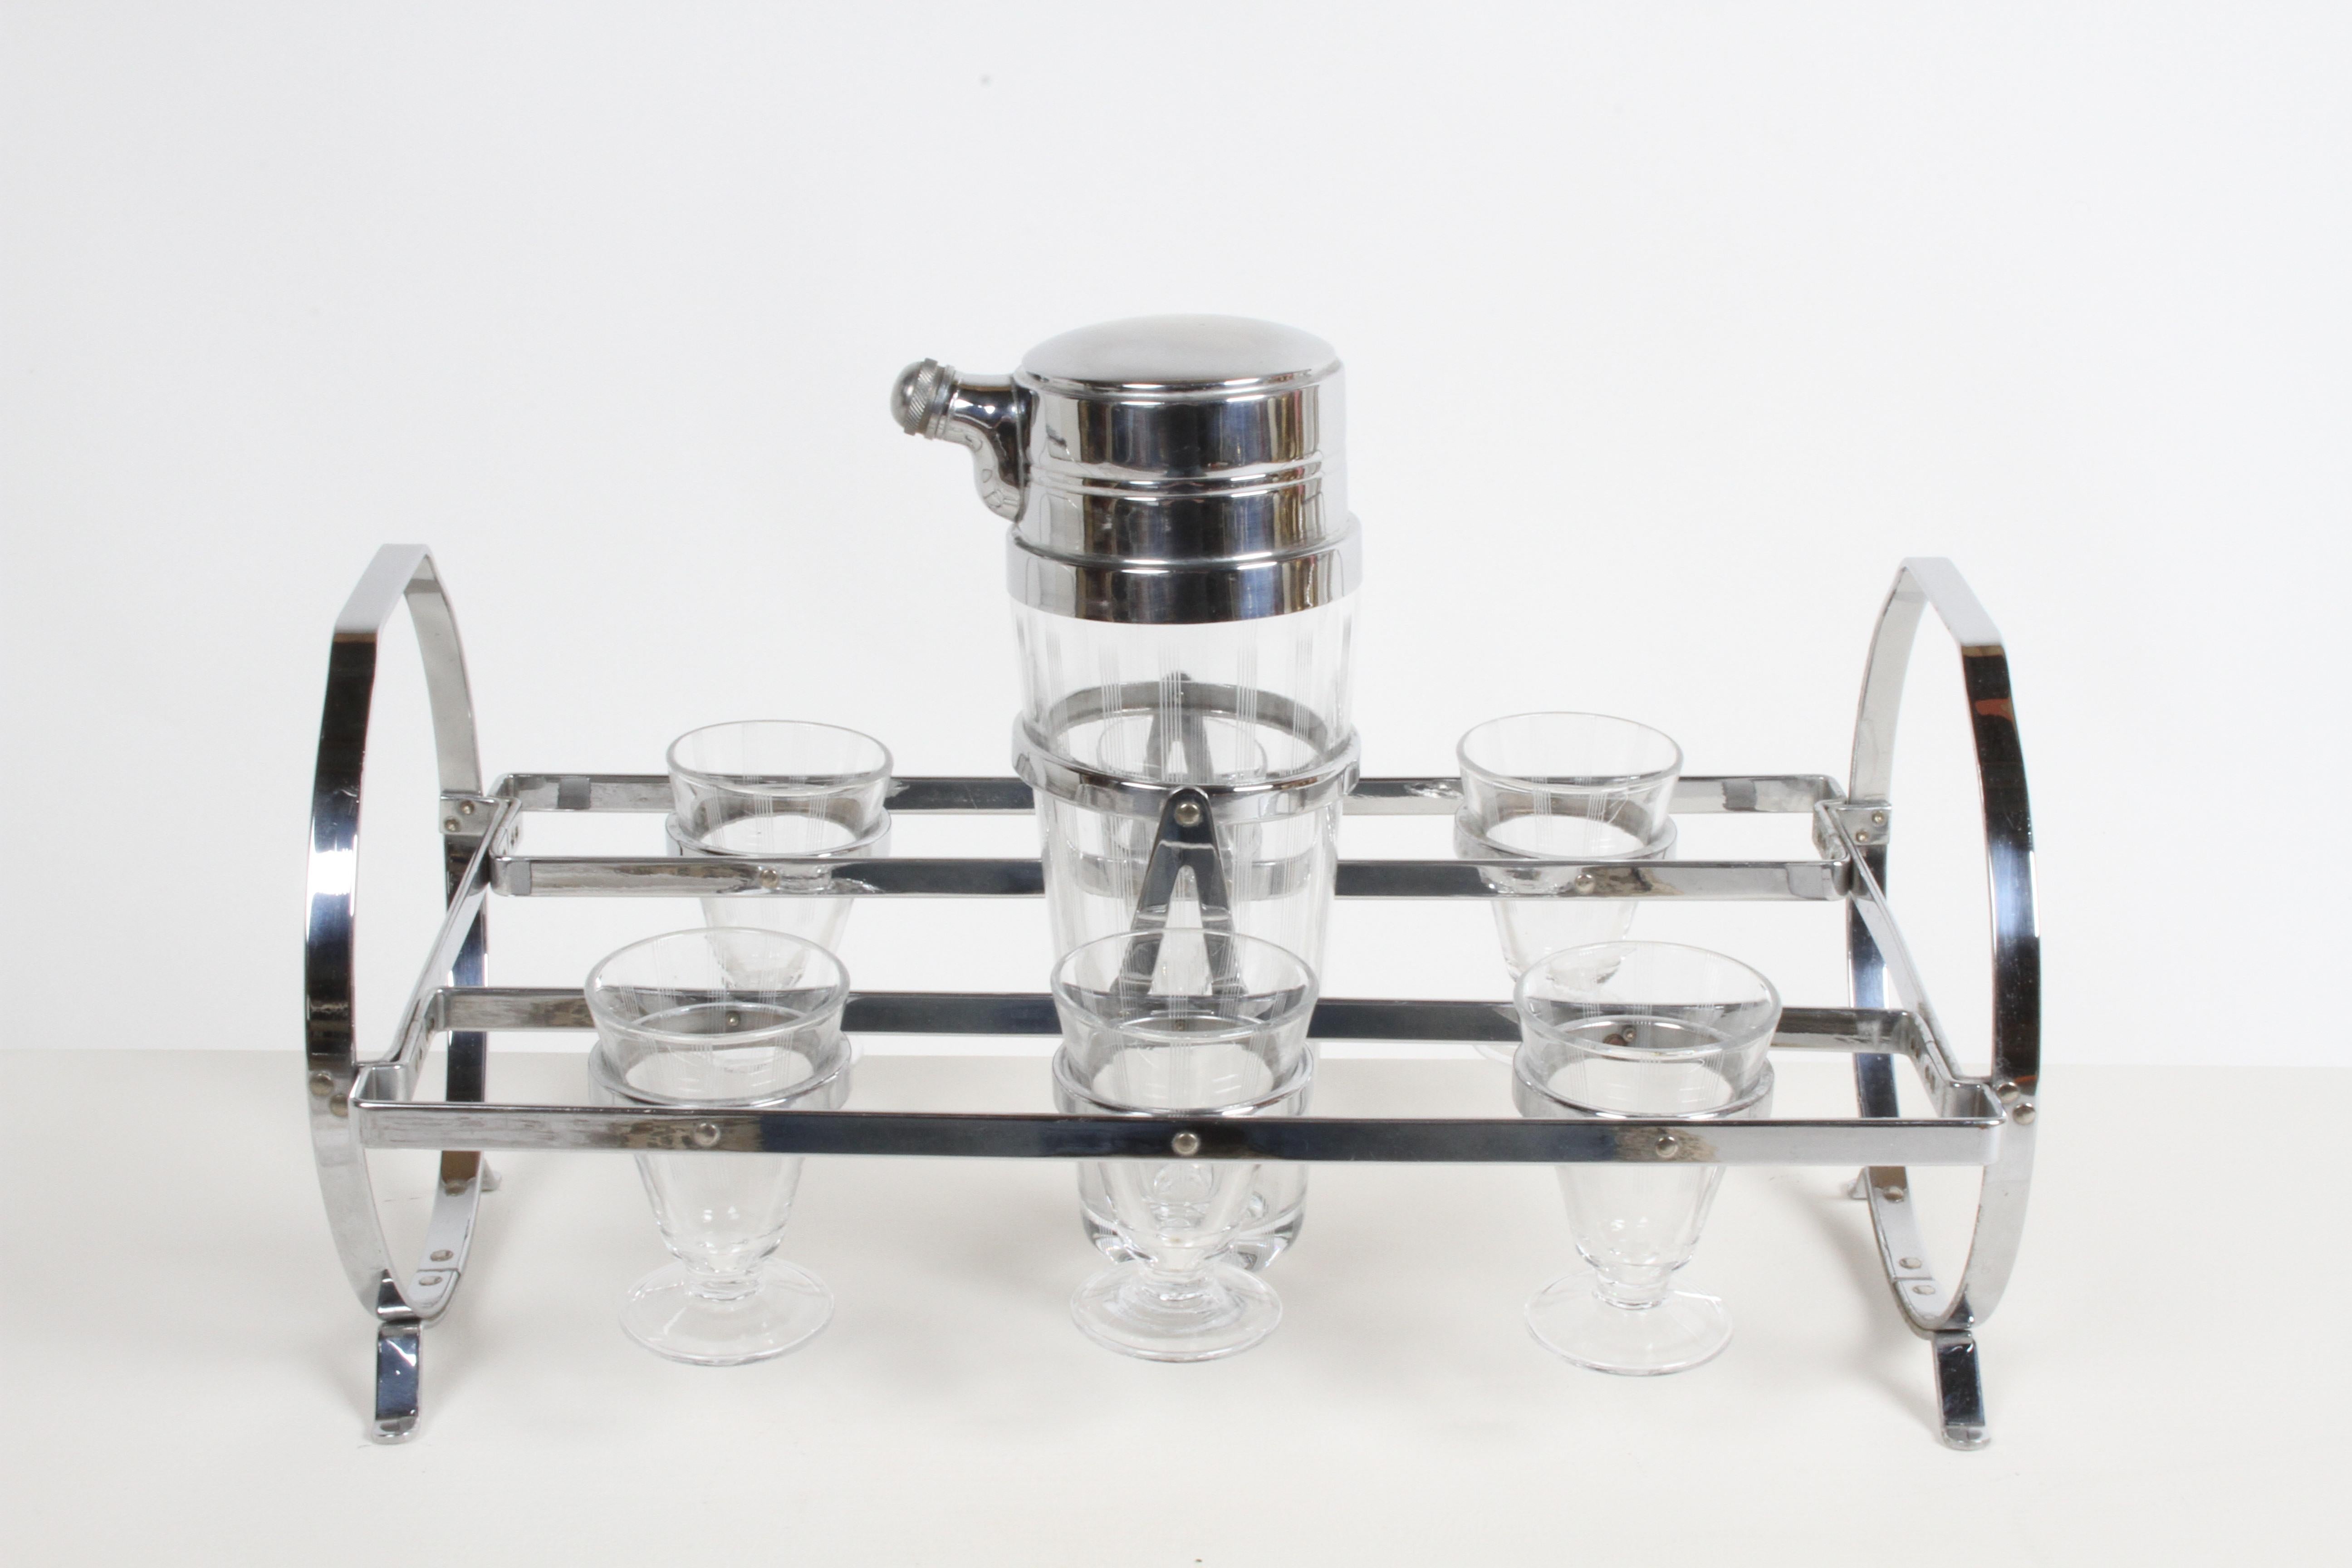 Fabulous period all original Art Deco or Machine Age Cocktail set barware set, consisting of tall etched glass cocktail shaker with chrome lid, matching etched drinking glasses on chrome Gyroscopic caddy or stand. In fine condition, with no damage